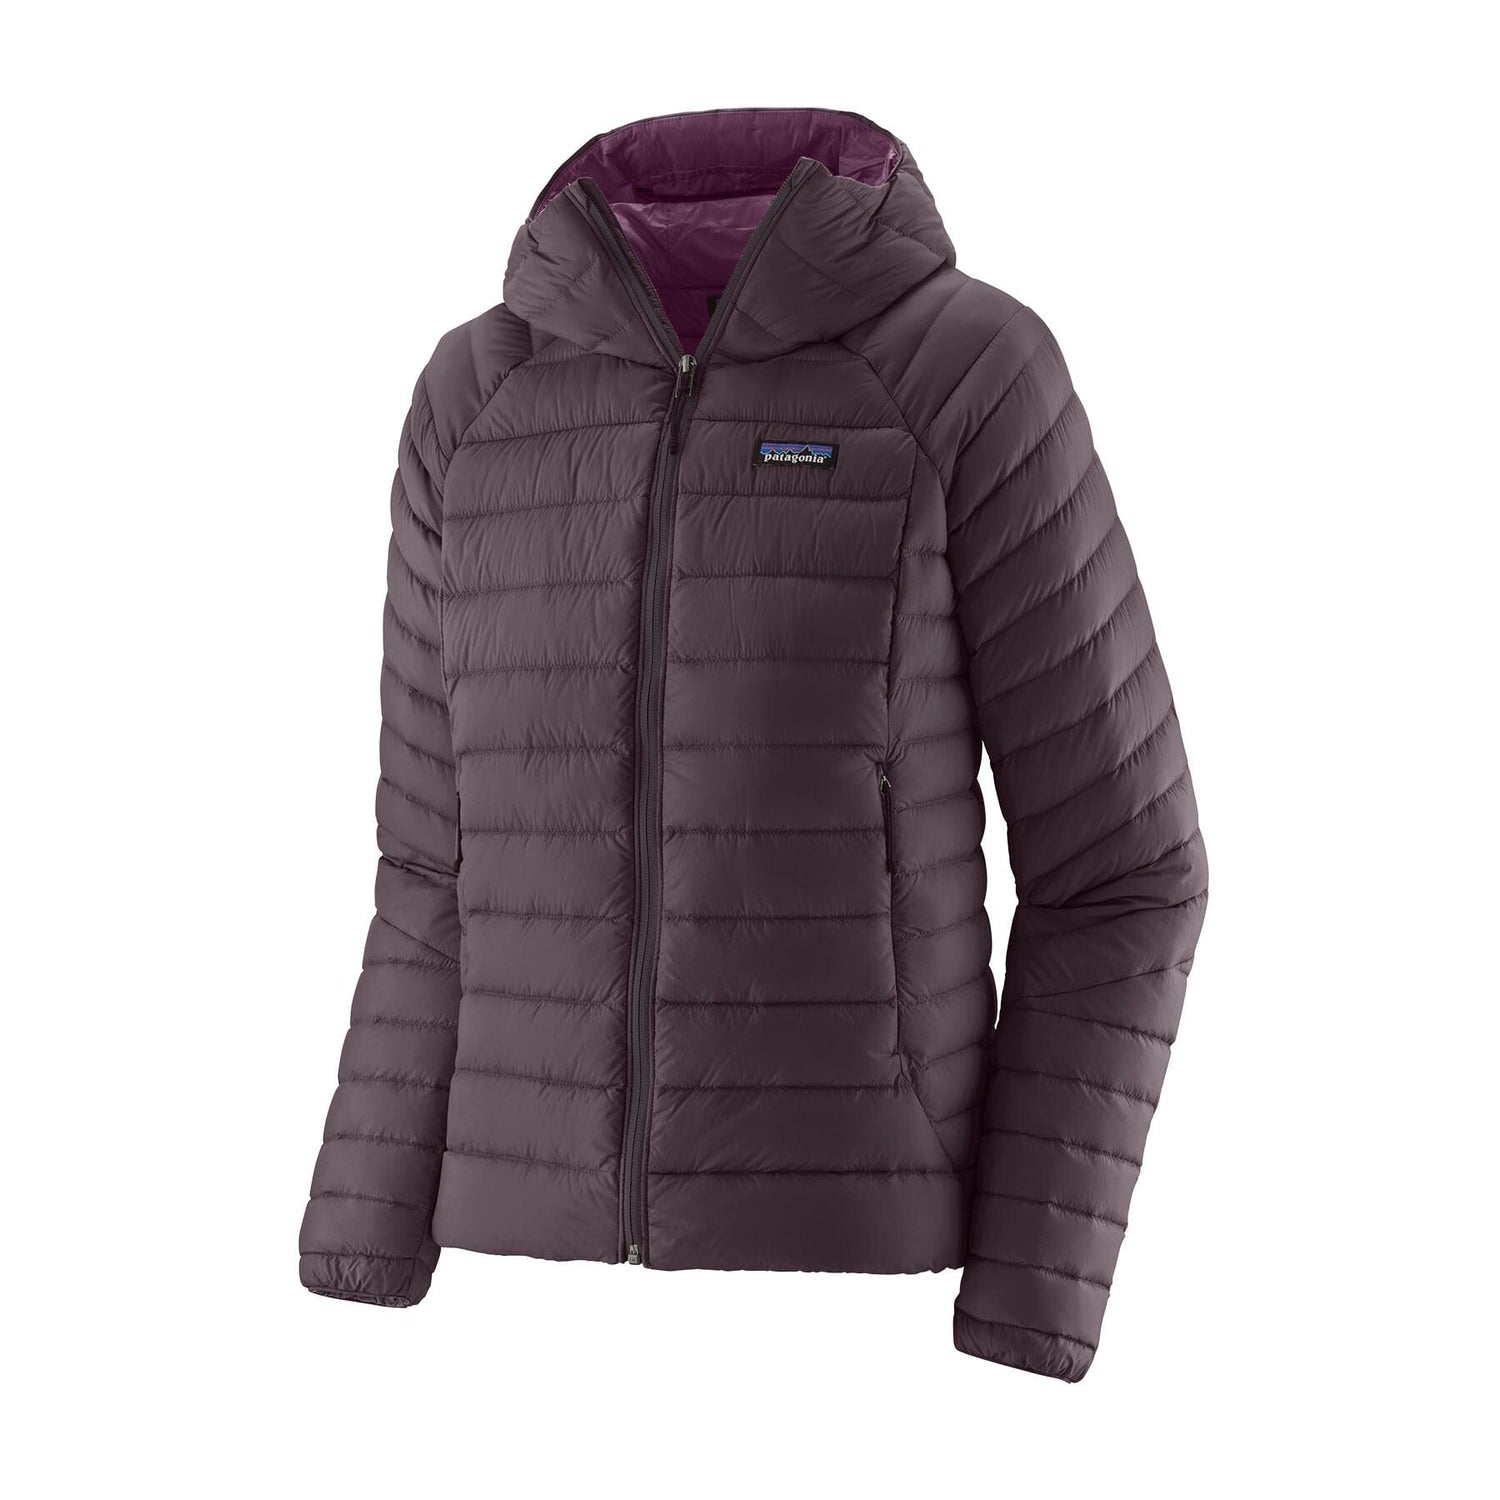 Patagonia W's Down Sweater Hoody - Recycled Nylon & RDS certified Down Obsidian Plum Jacket